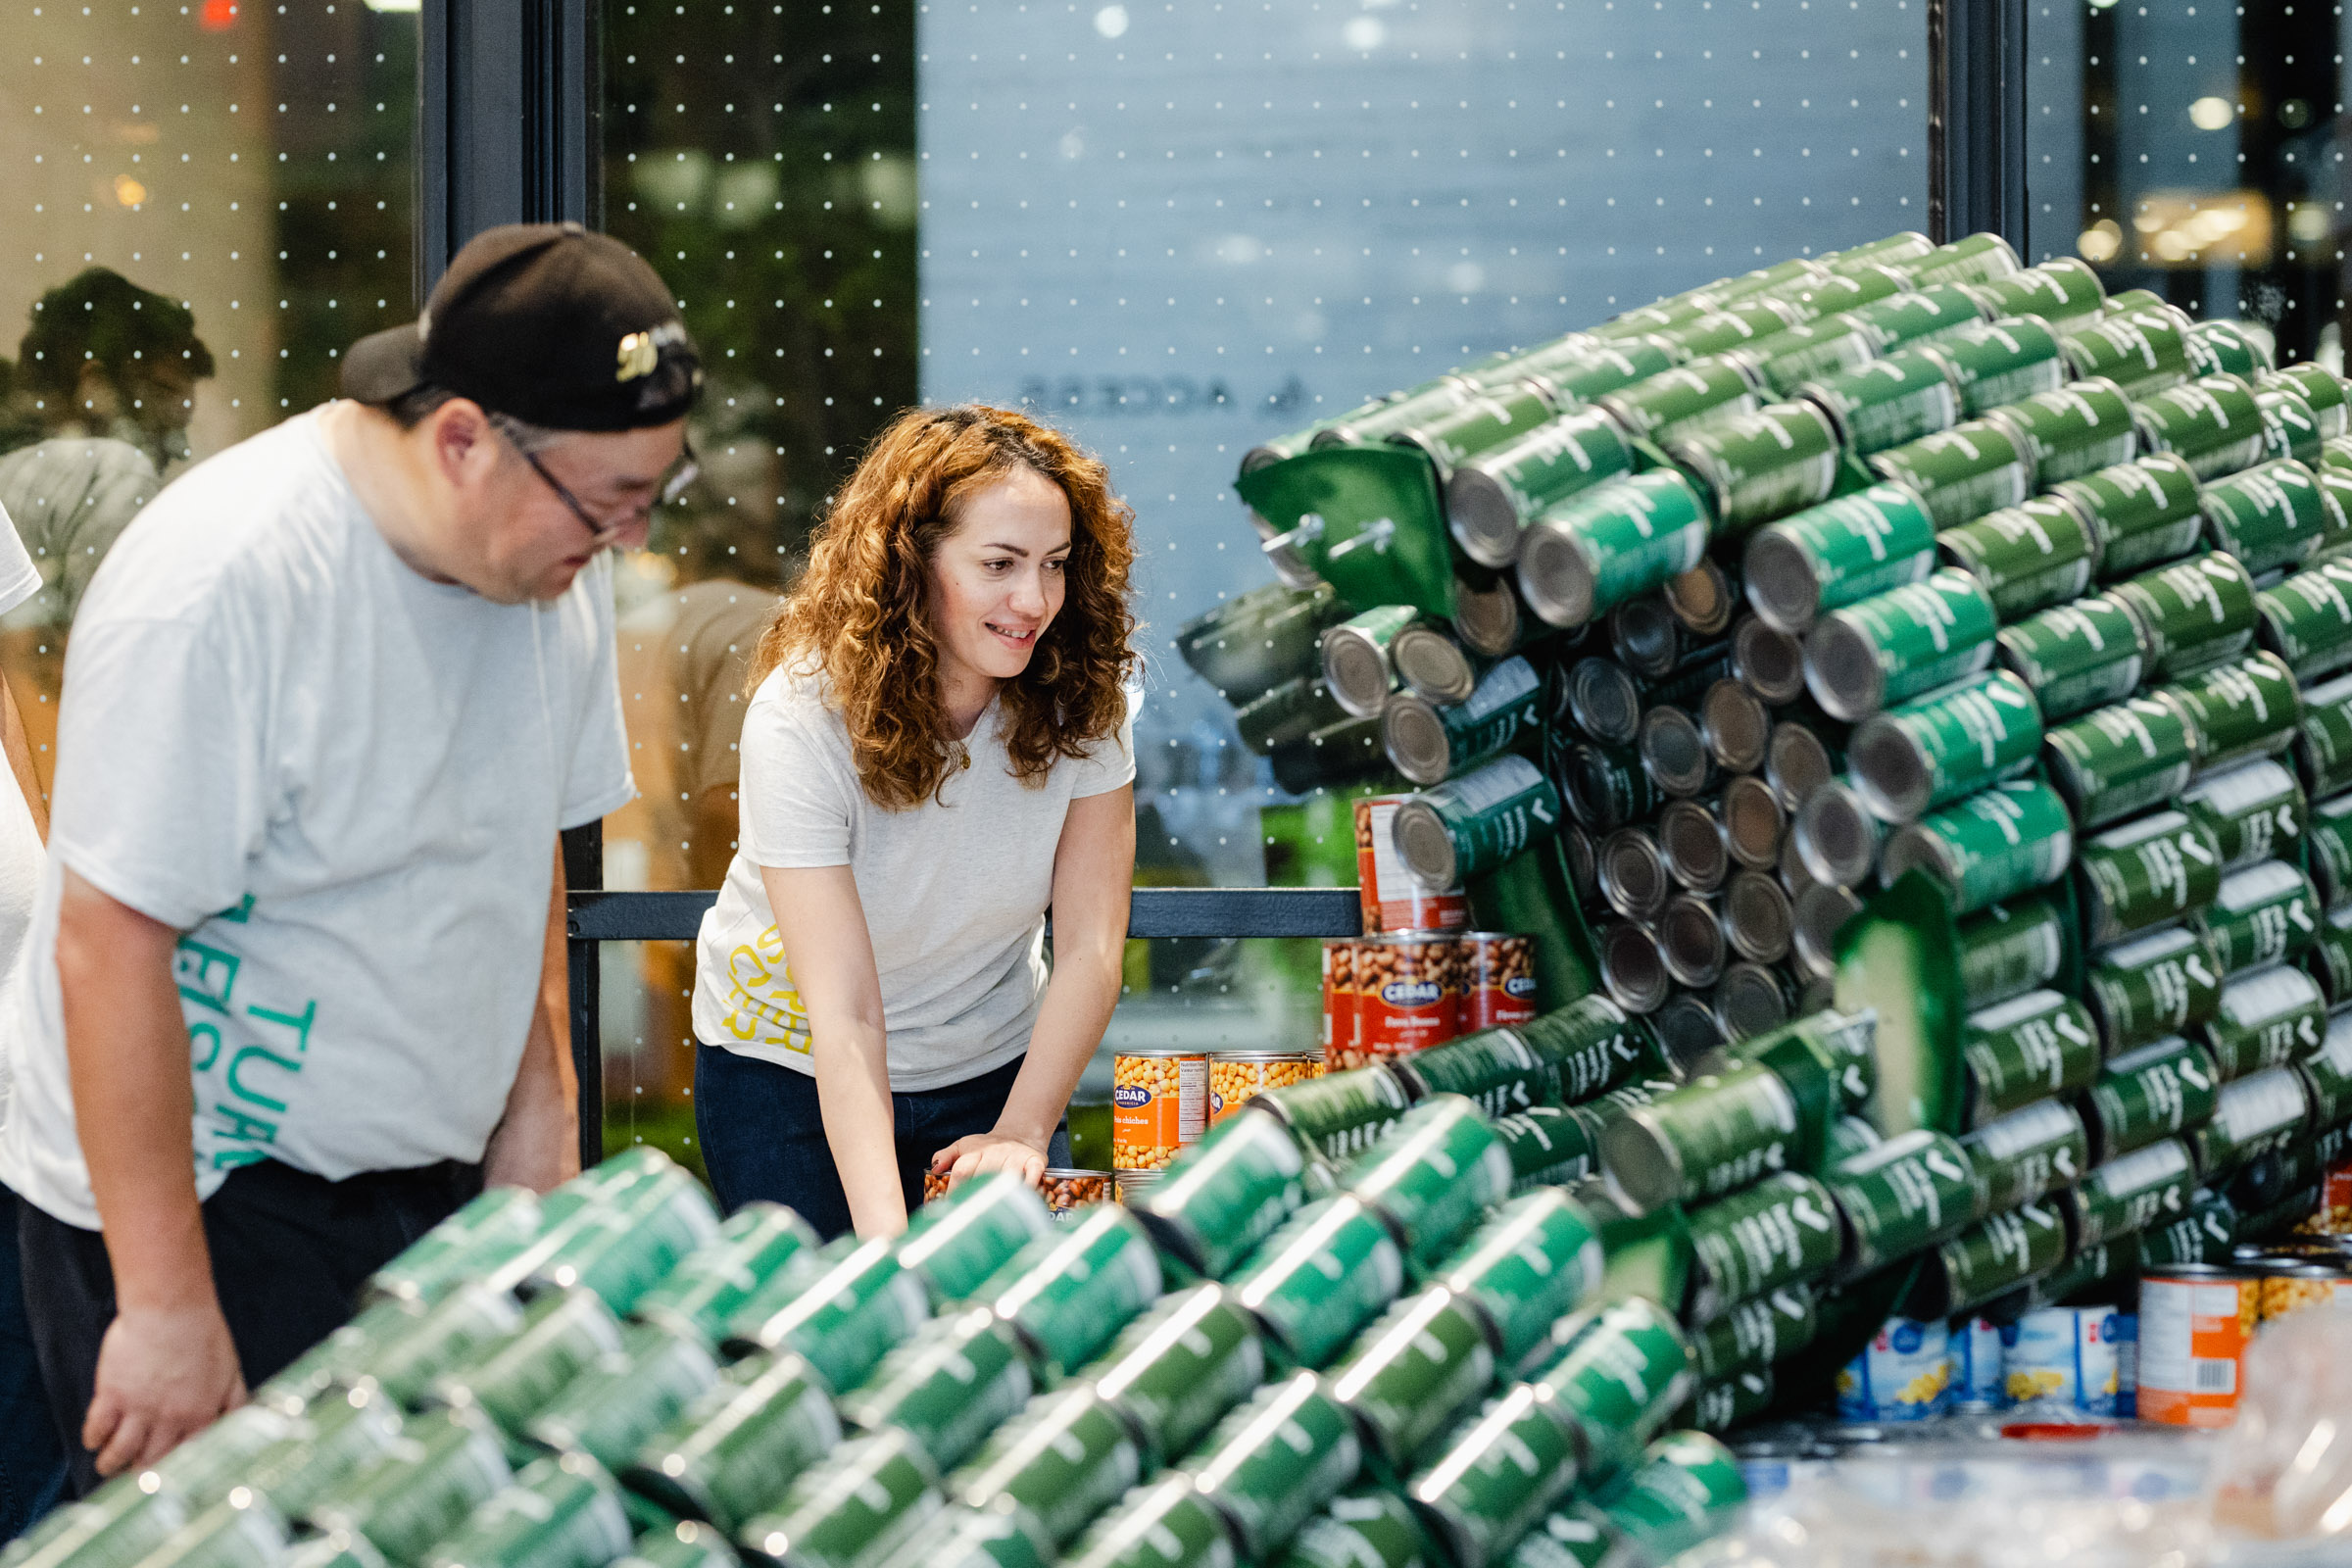 Two individuals are meticulously arranging a large display made of stacked green cans indoors. With the precision of event photography, they seem focused on organizing the structure.